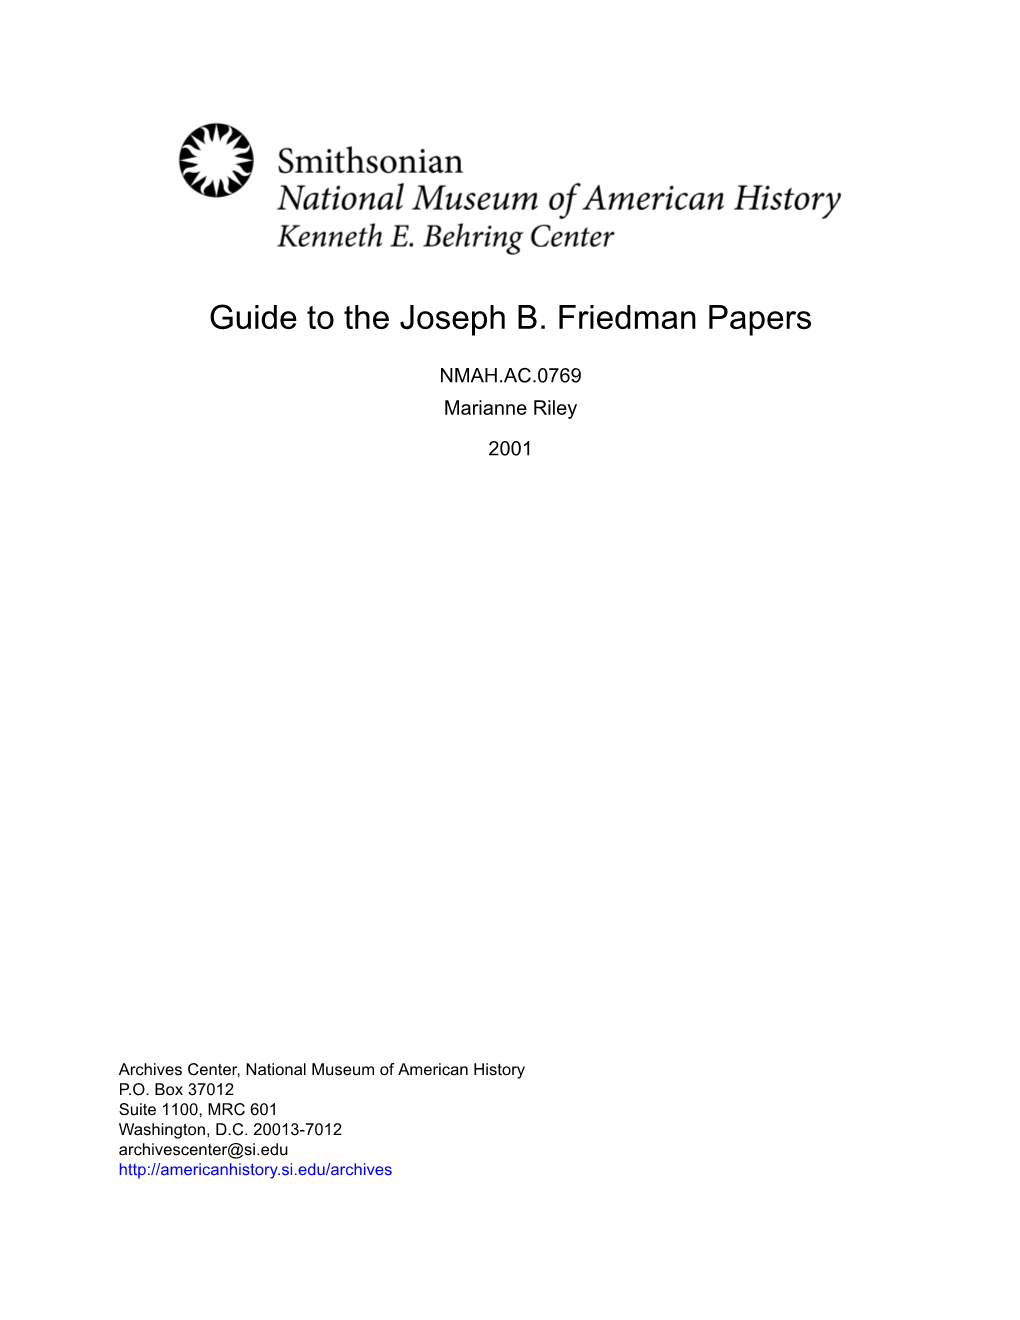 Guide to the Joseph B. Friedman Papers